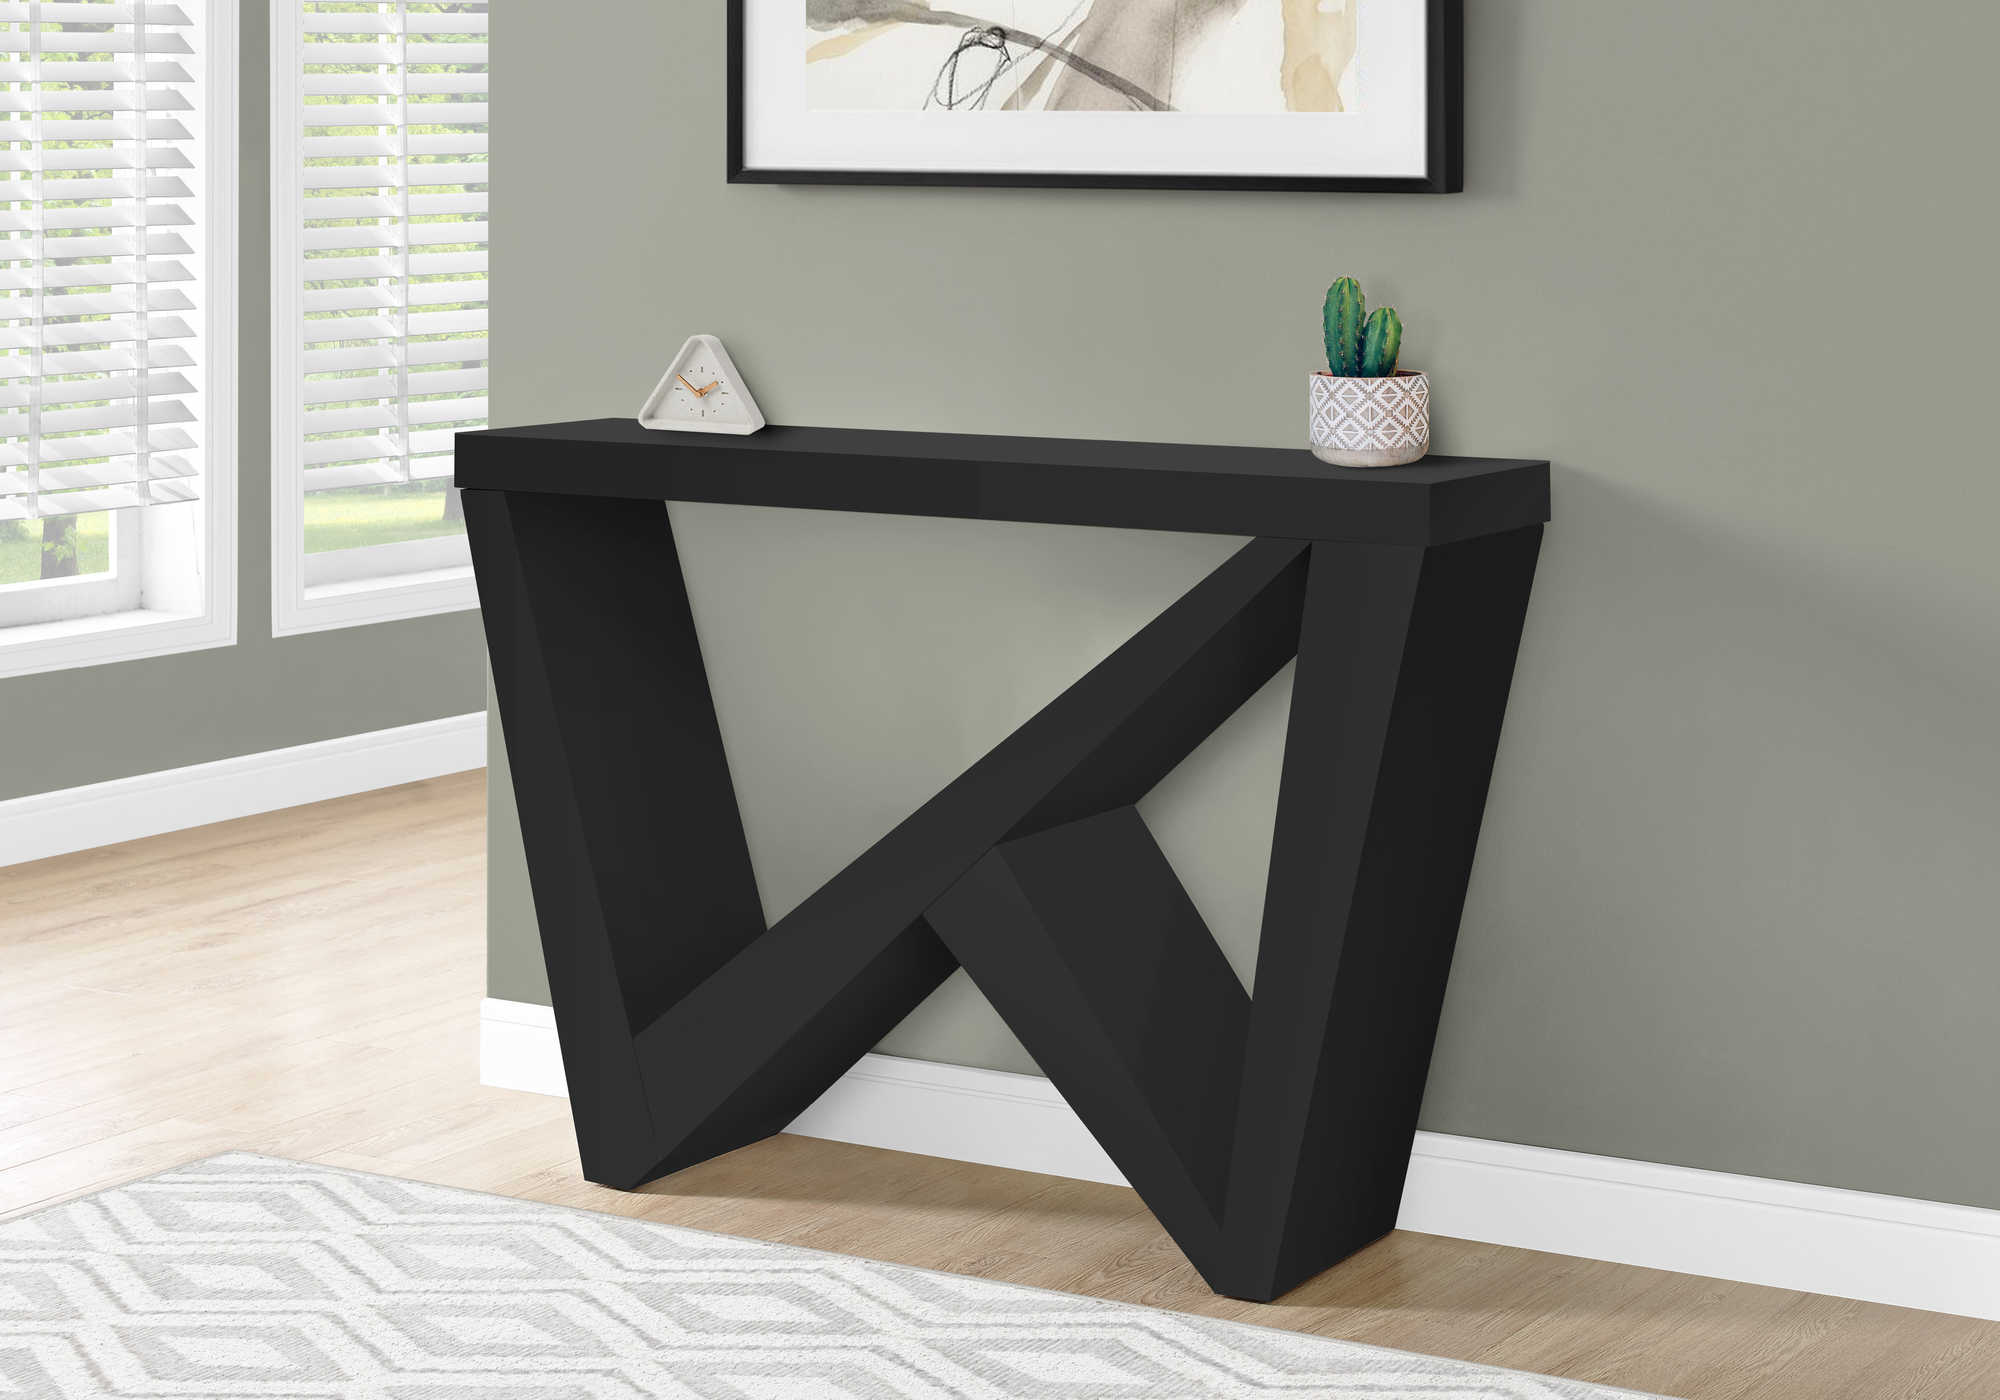 ACCENT TABLE - 48"L / BLACK HALL CONSOLE